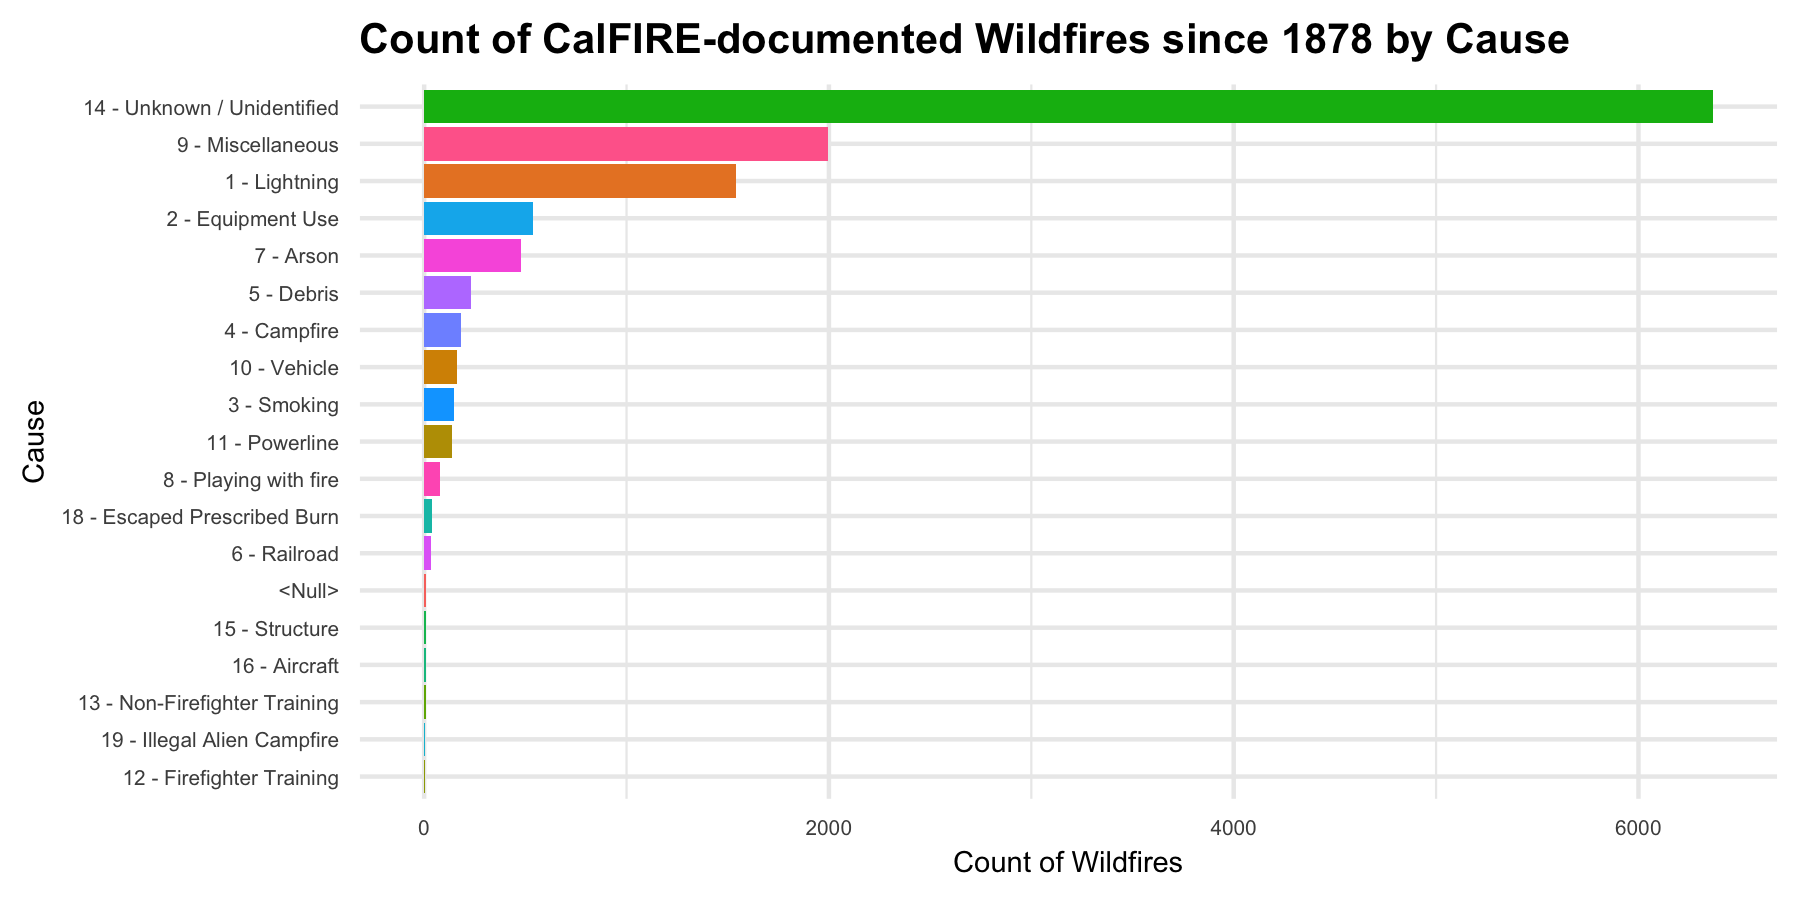 Figure 1: Plot counting wildfires in California by cause. In the plot, the fewest fires have been attributed to illegal alien campfires and firefighter training.